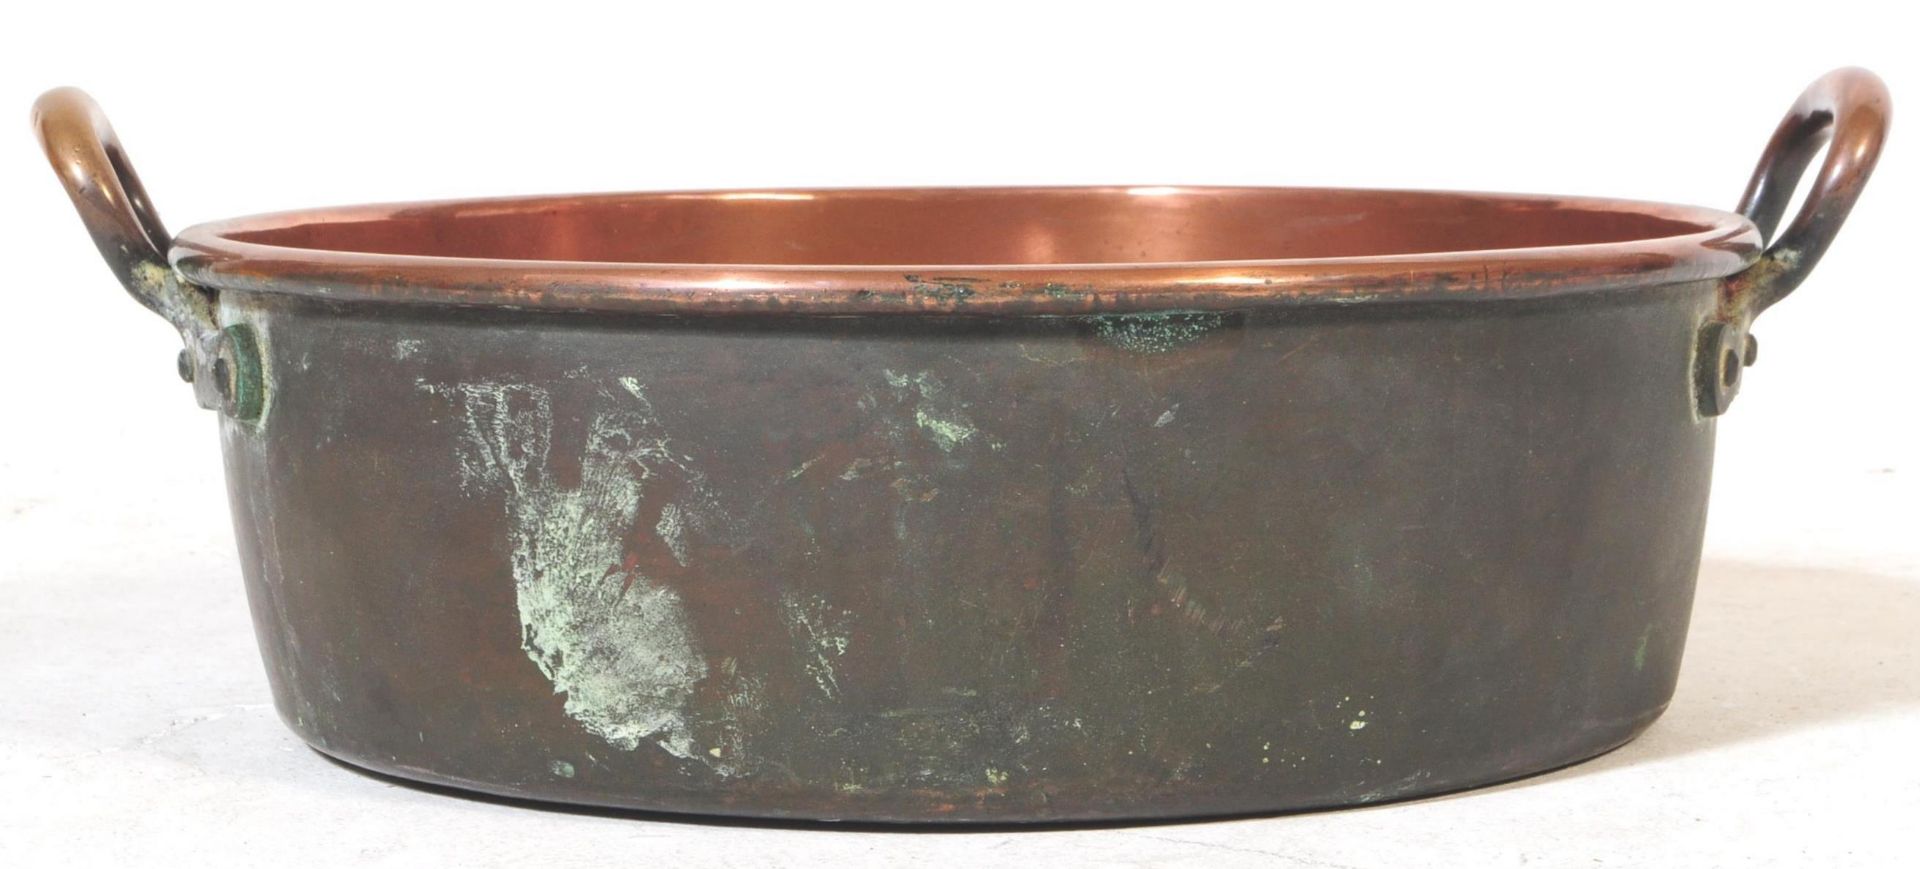 19TH CENTURY VICTORIAN COPPER MIXING BOWL